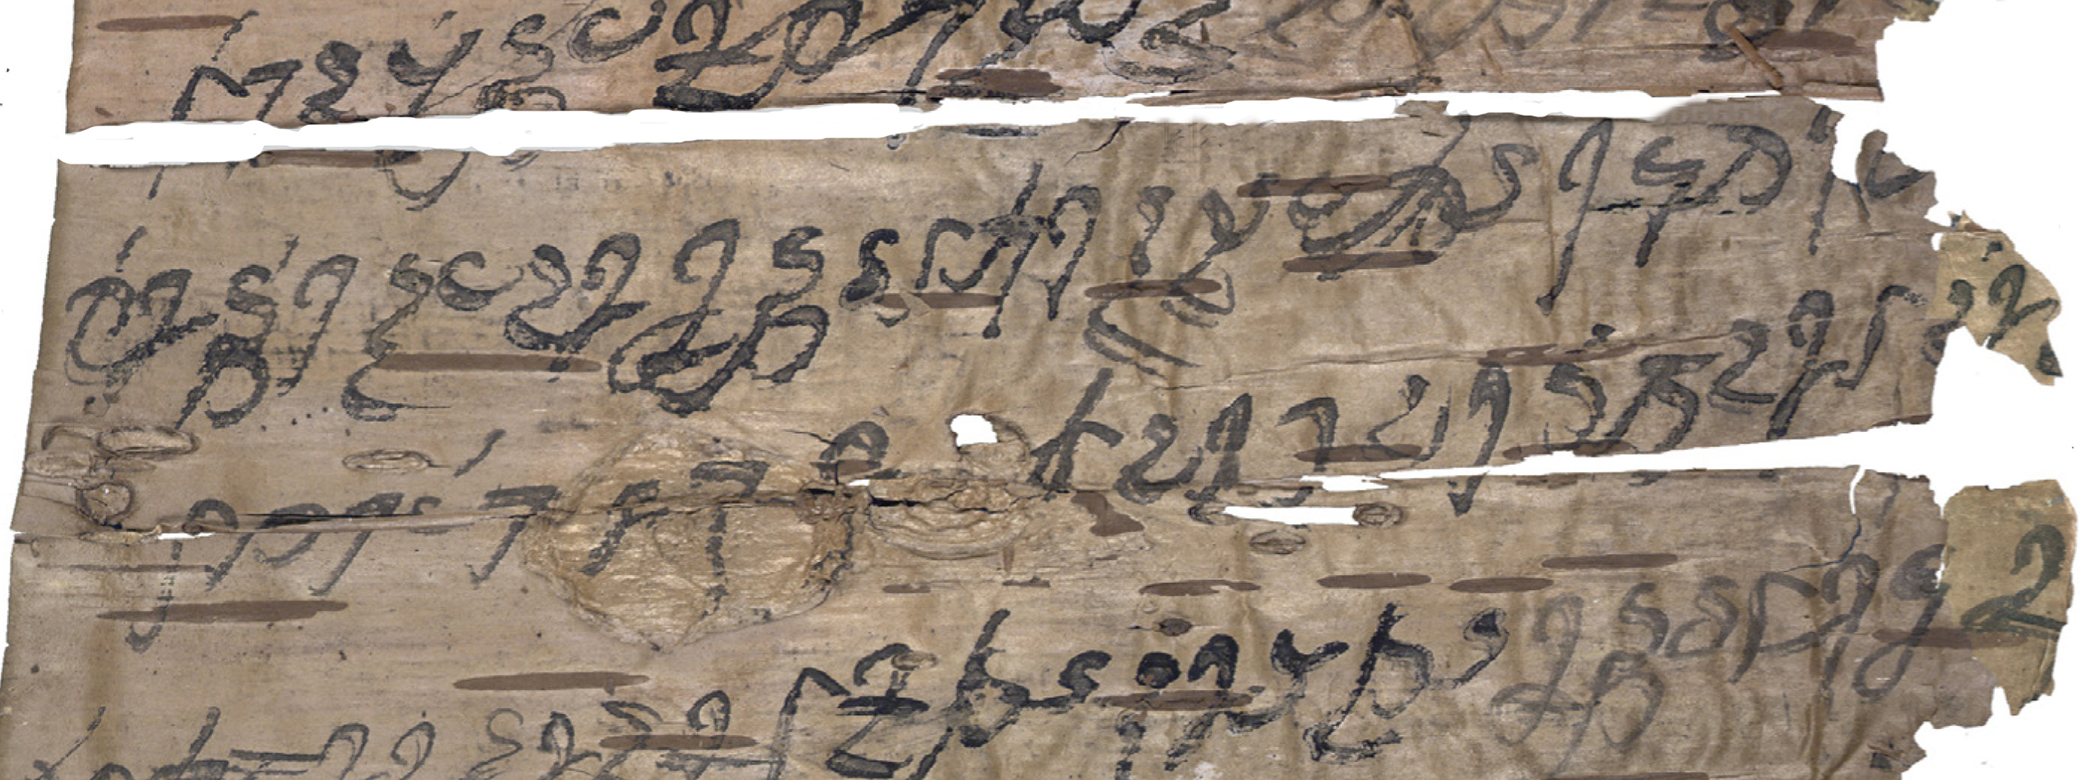 Detail from Early Buddhists Manuscripts Project fragments